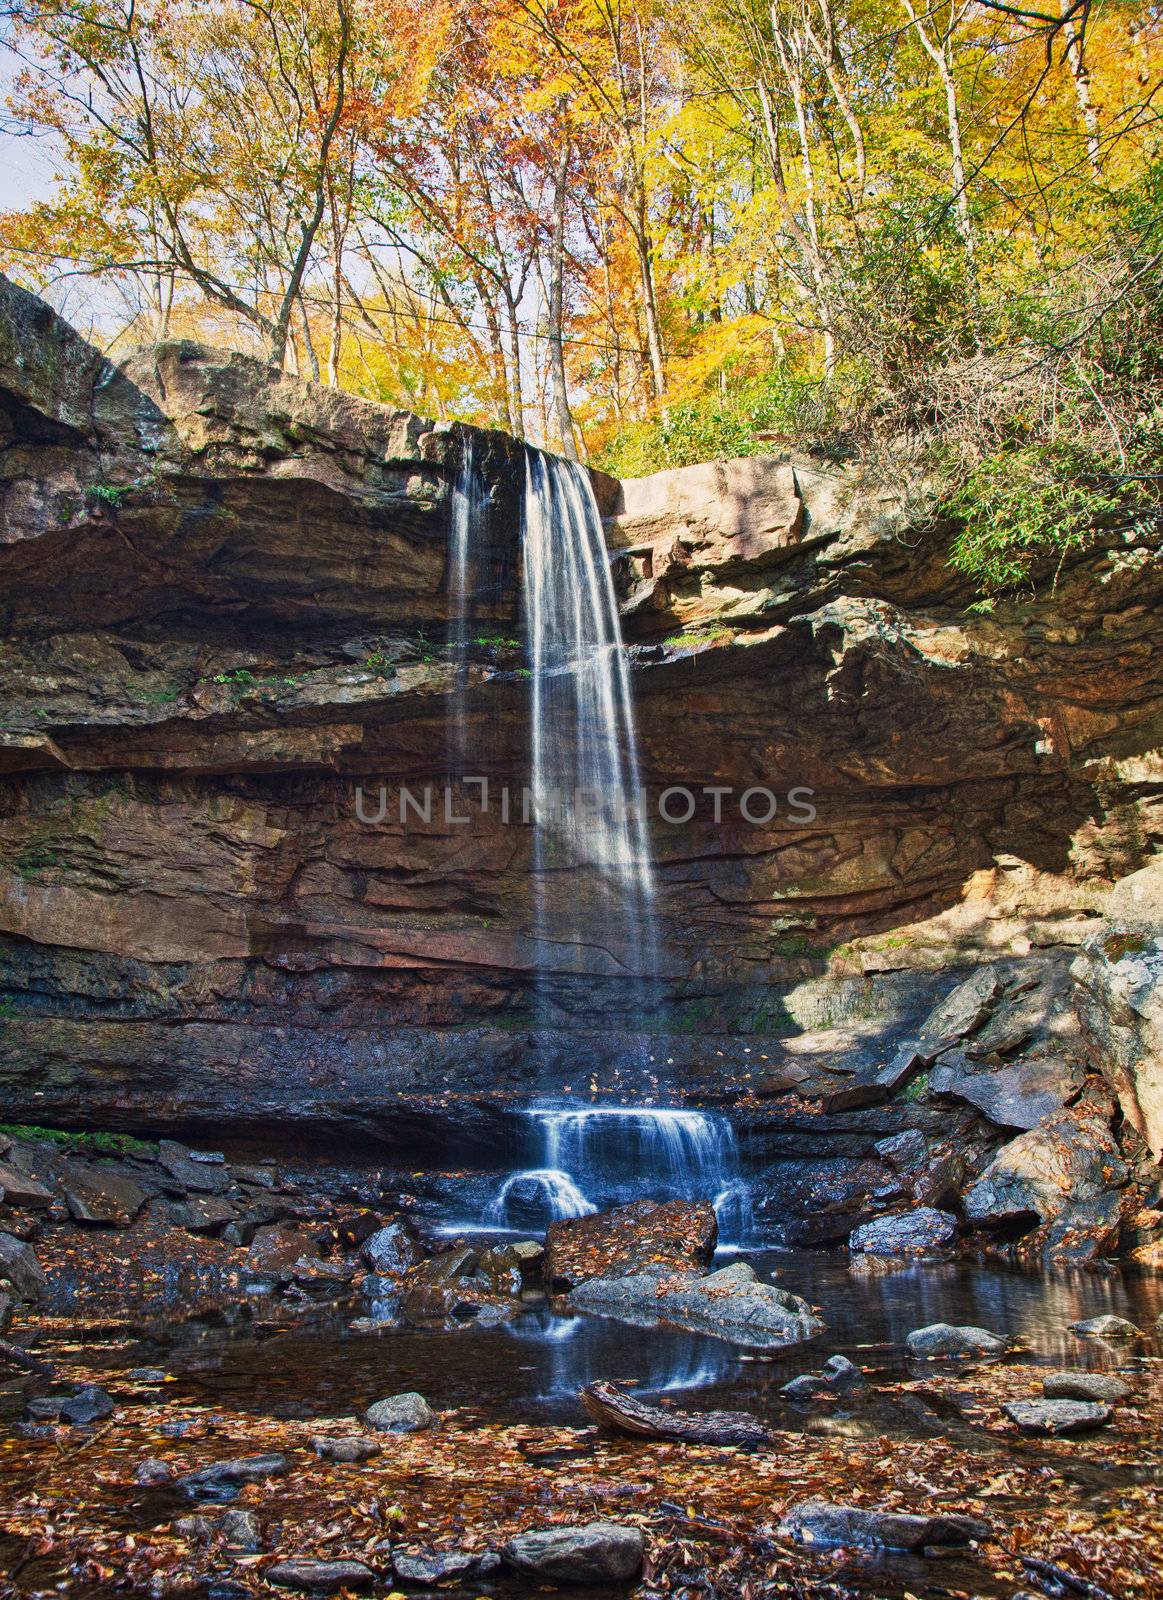 Veil of water over Cucumber Falls by steheap